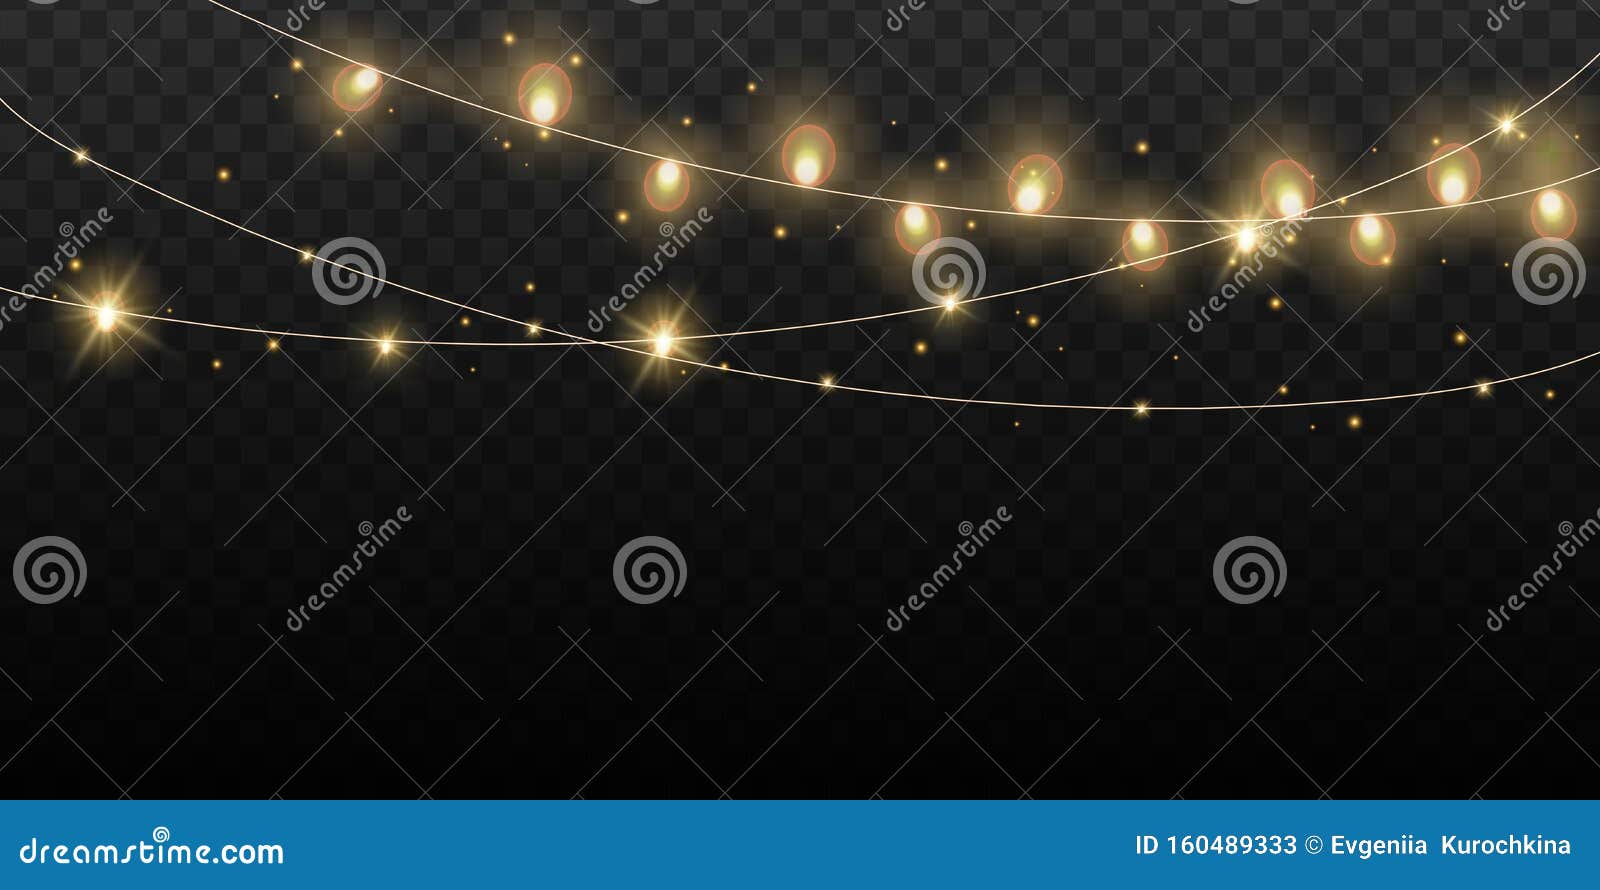 christmas lights bulbs . glowing golden christmas party hanging lamp garlands string for xmas holiday cards